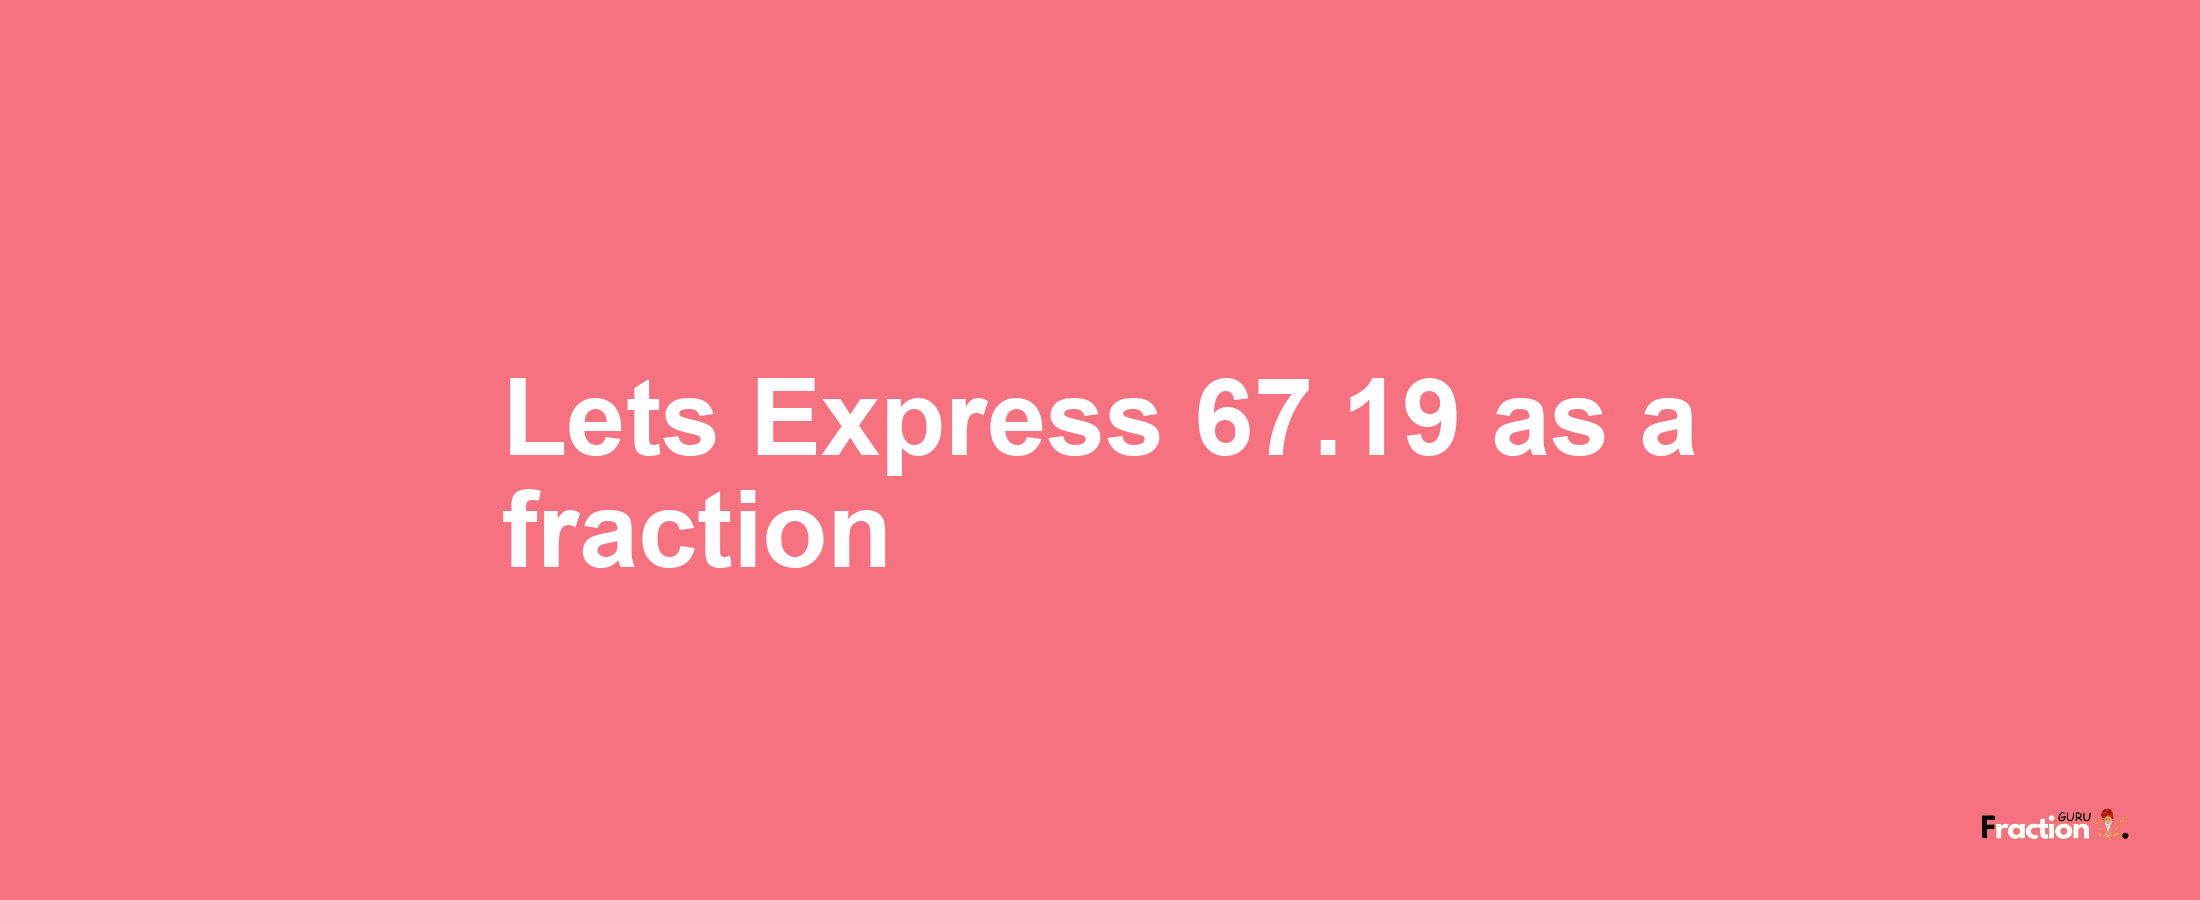 Lets Express 67.19 as afraction